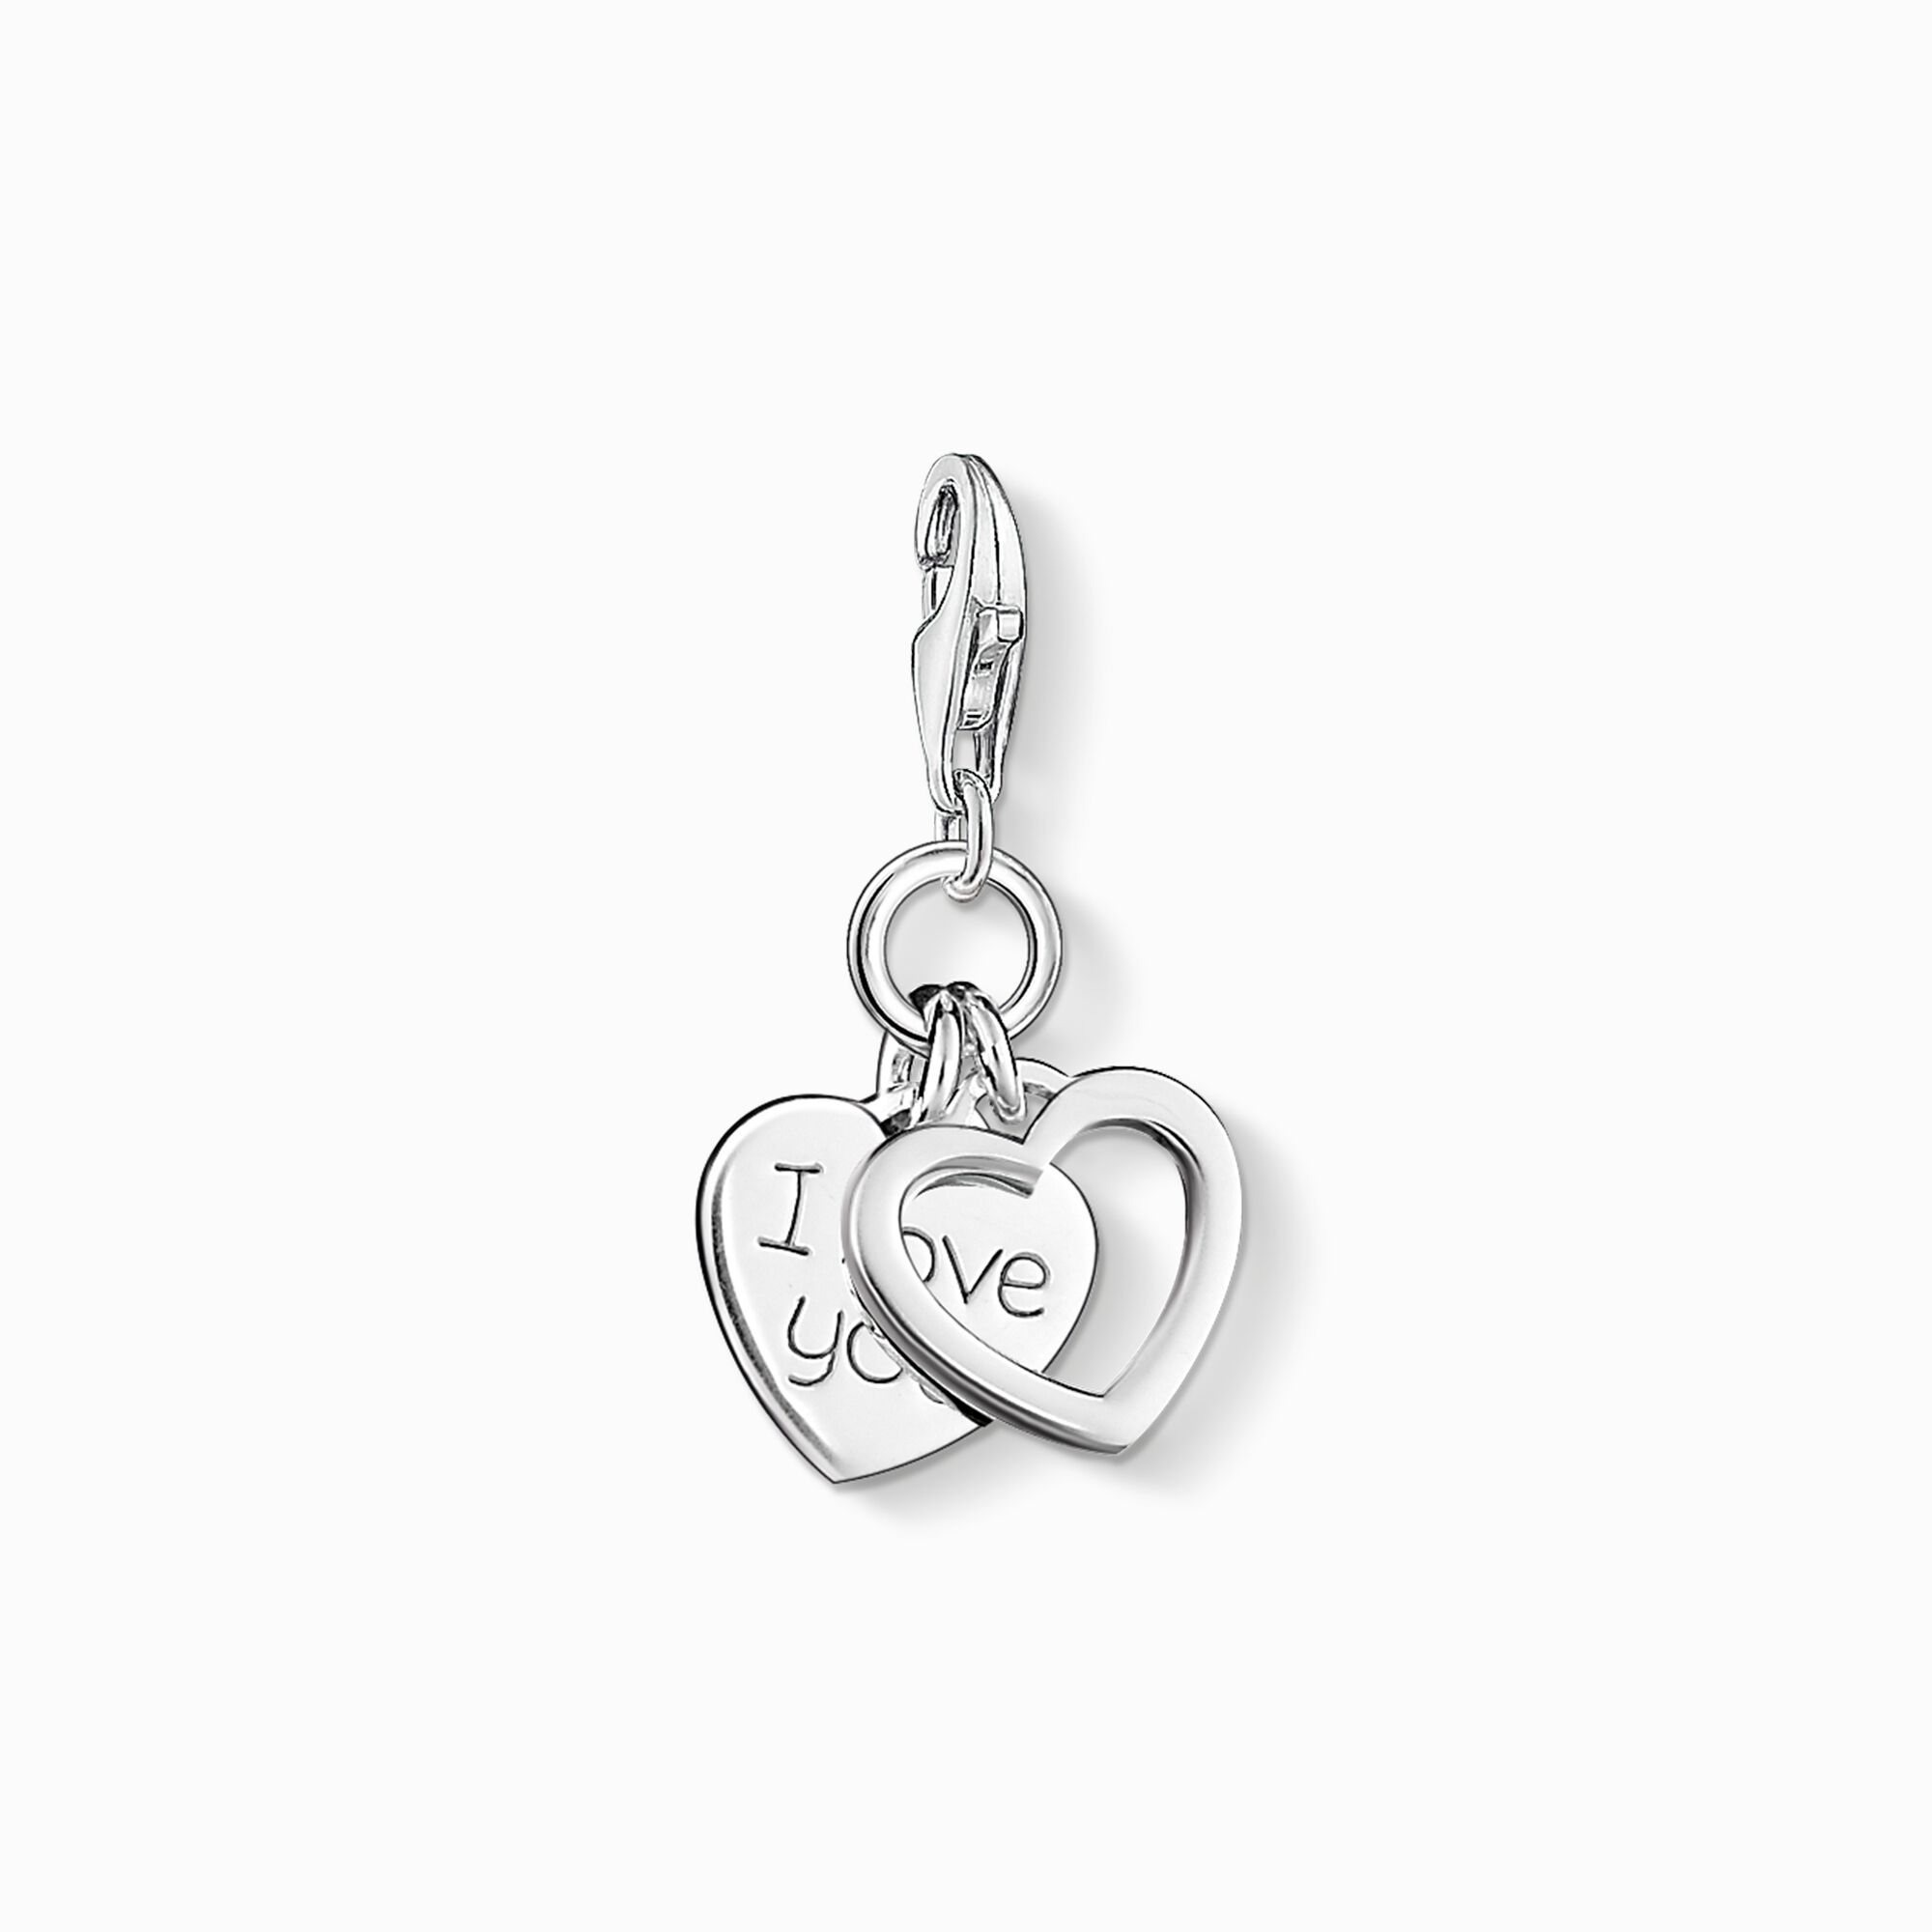 Charm pendant I LOVE YOU hearts from the Charm Club collection in the THOMAS SABO online store